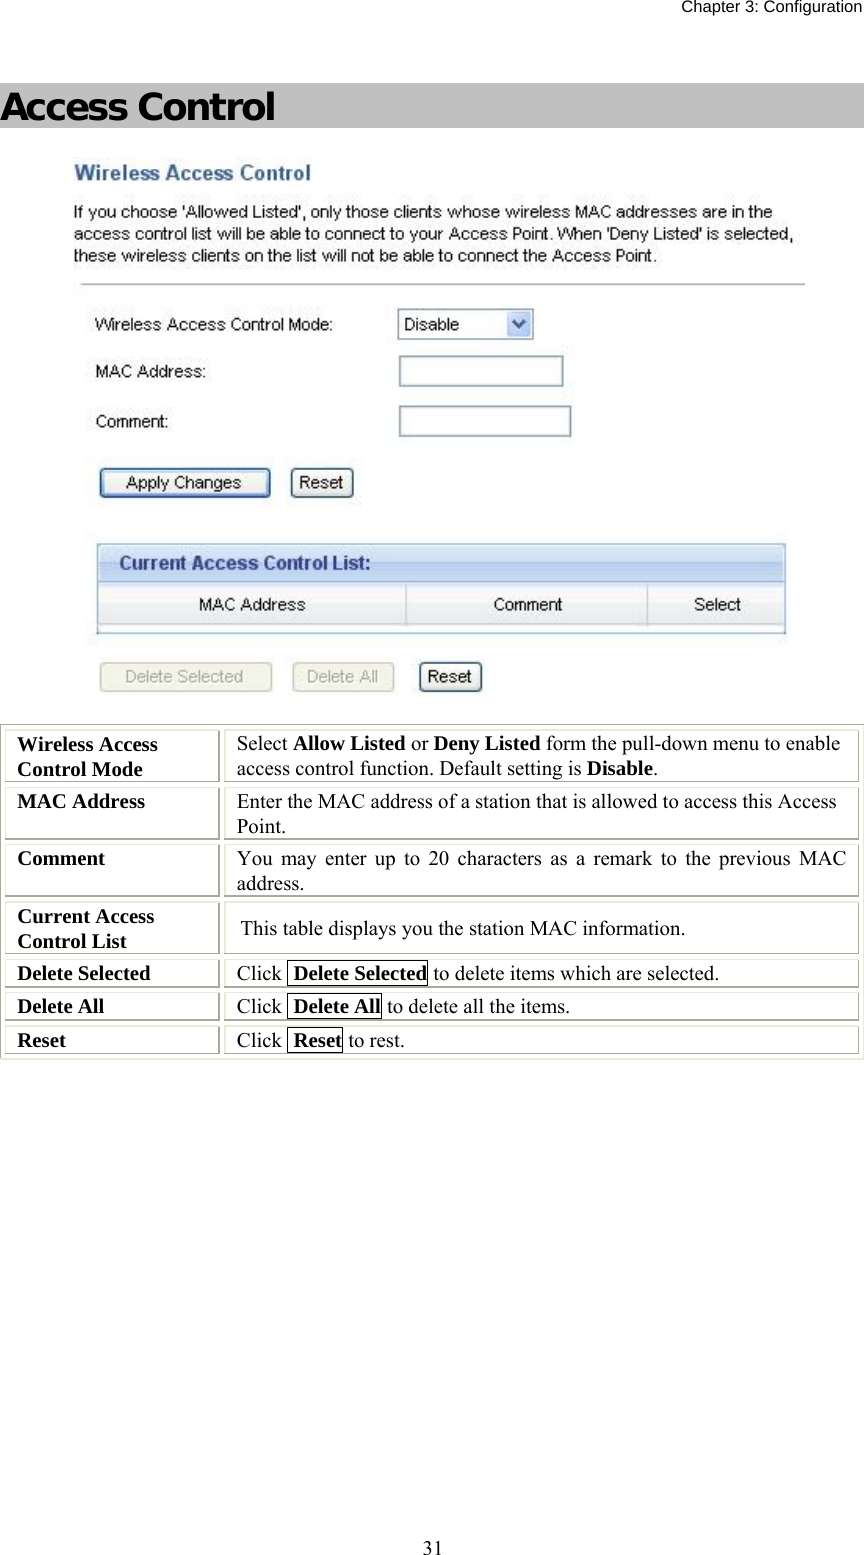   Chapter 3: Configuration  31 Access Control   Wireless Access Control Mode  Select Allow Listed or Deny Listed form the pull-down menu to enable access control function. Default setting is Disable. MAC Address  Enter the MAC address of a station that is allowed to access this Access Point. Comment   You may enter up to 20 characters as a remark to the previous MAC address. Current Access Control List  This table displays you the station MAC information. Delete Selected  Click  Delete Selected to delete items which are selected. Delete All  Click  Delete All to delete all the items. Reset  Click  Reset to rest.  